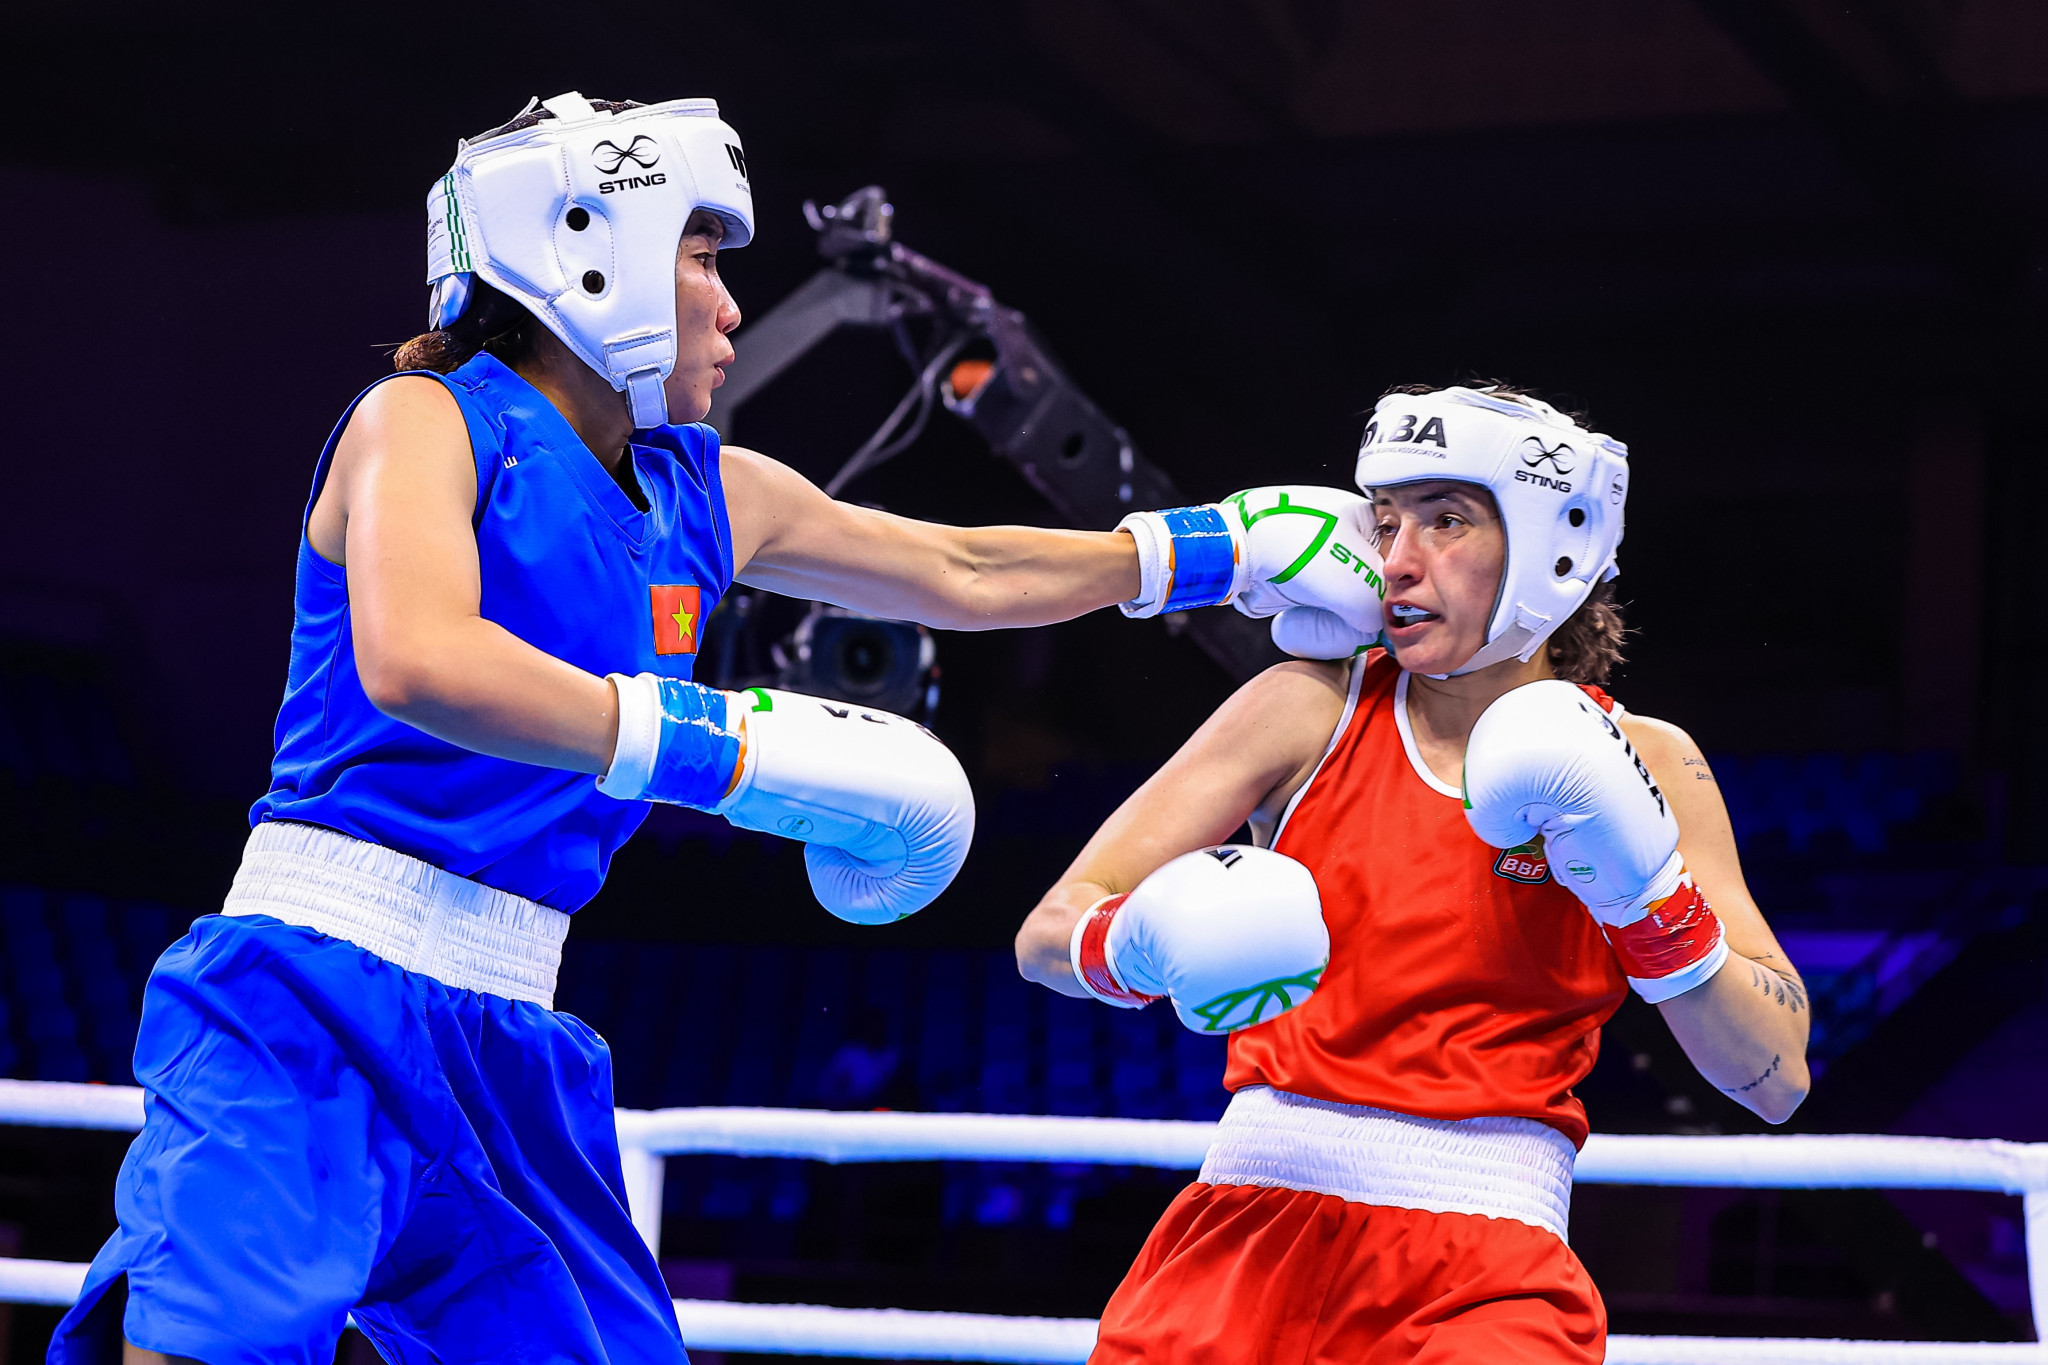 Thi Ngoc Tran Nguyen of Vietnam overcomes Venelina Poptoleva of Bulgaira in a match that was decided by a bout review ©IBA